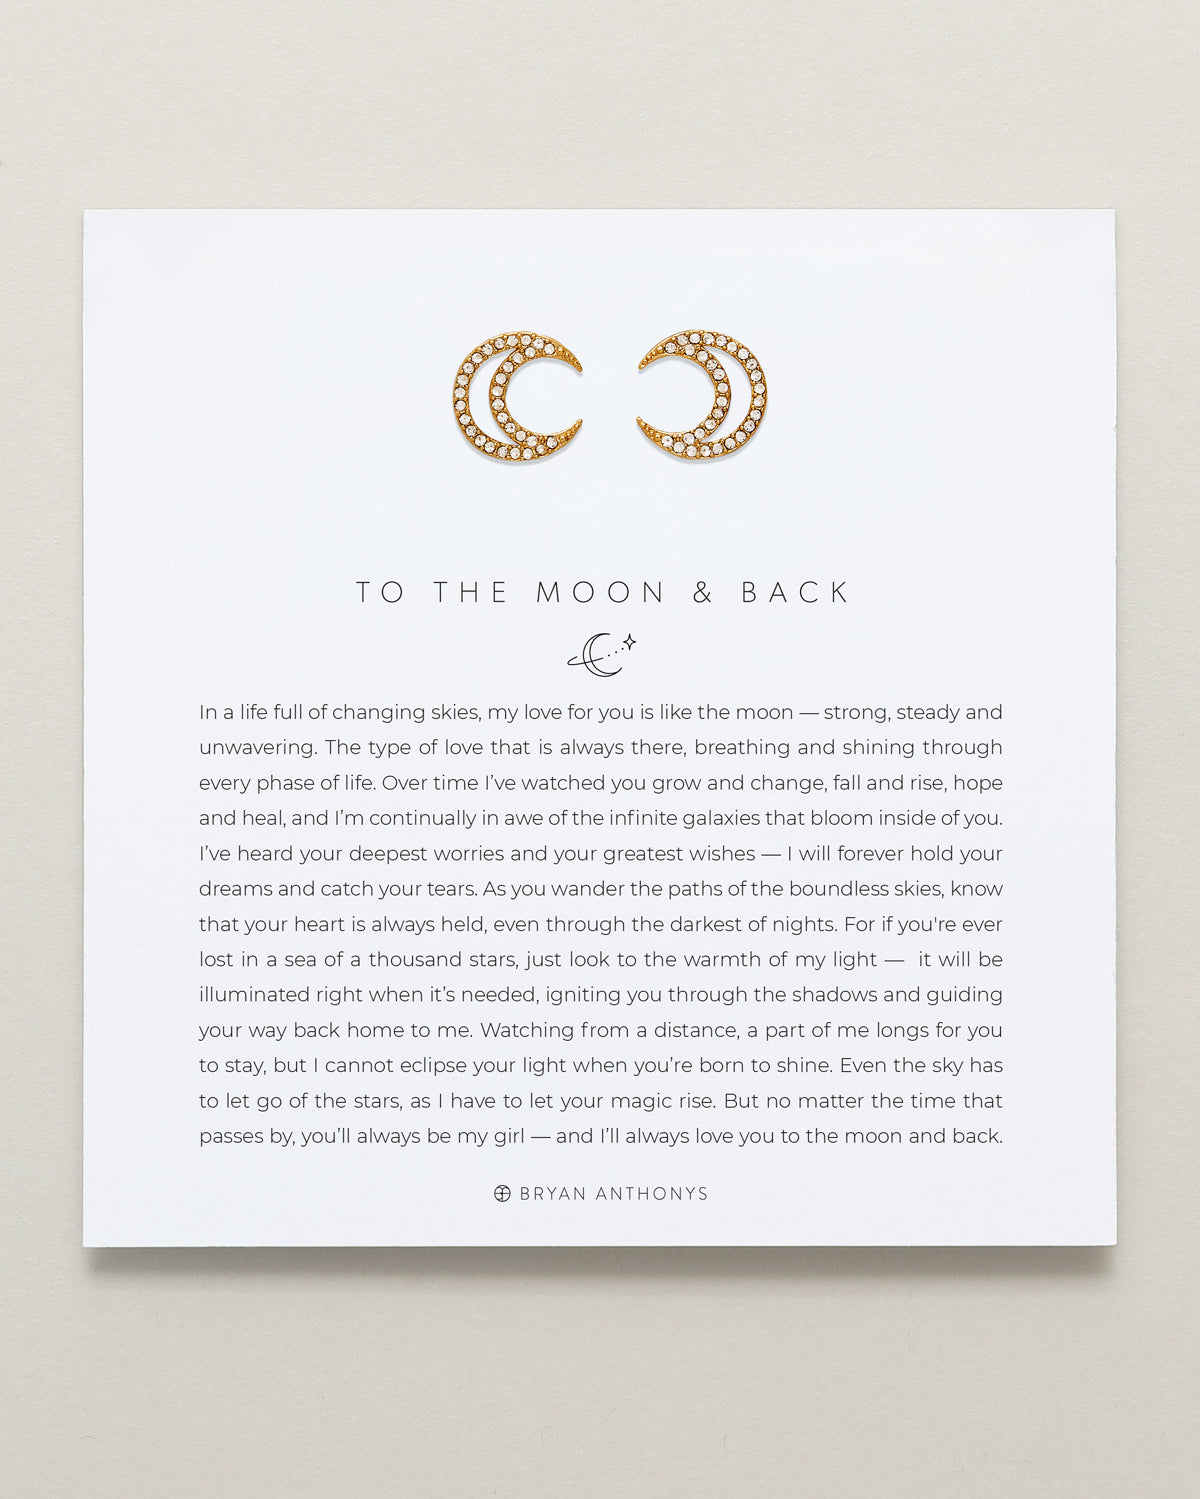 Bryan Anthonys To The Moon And Back Gold Stud Earrings On Card